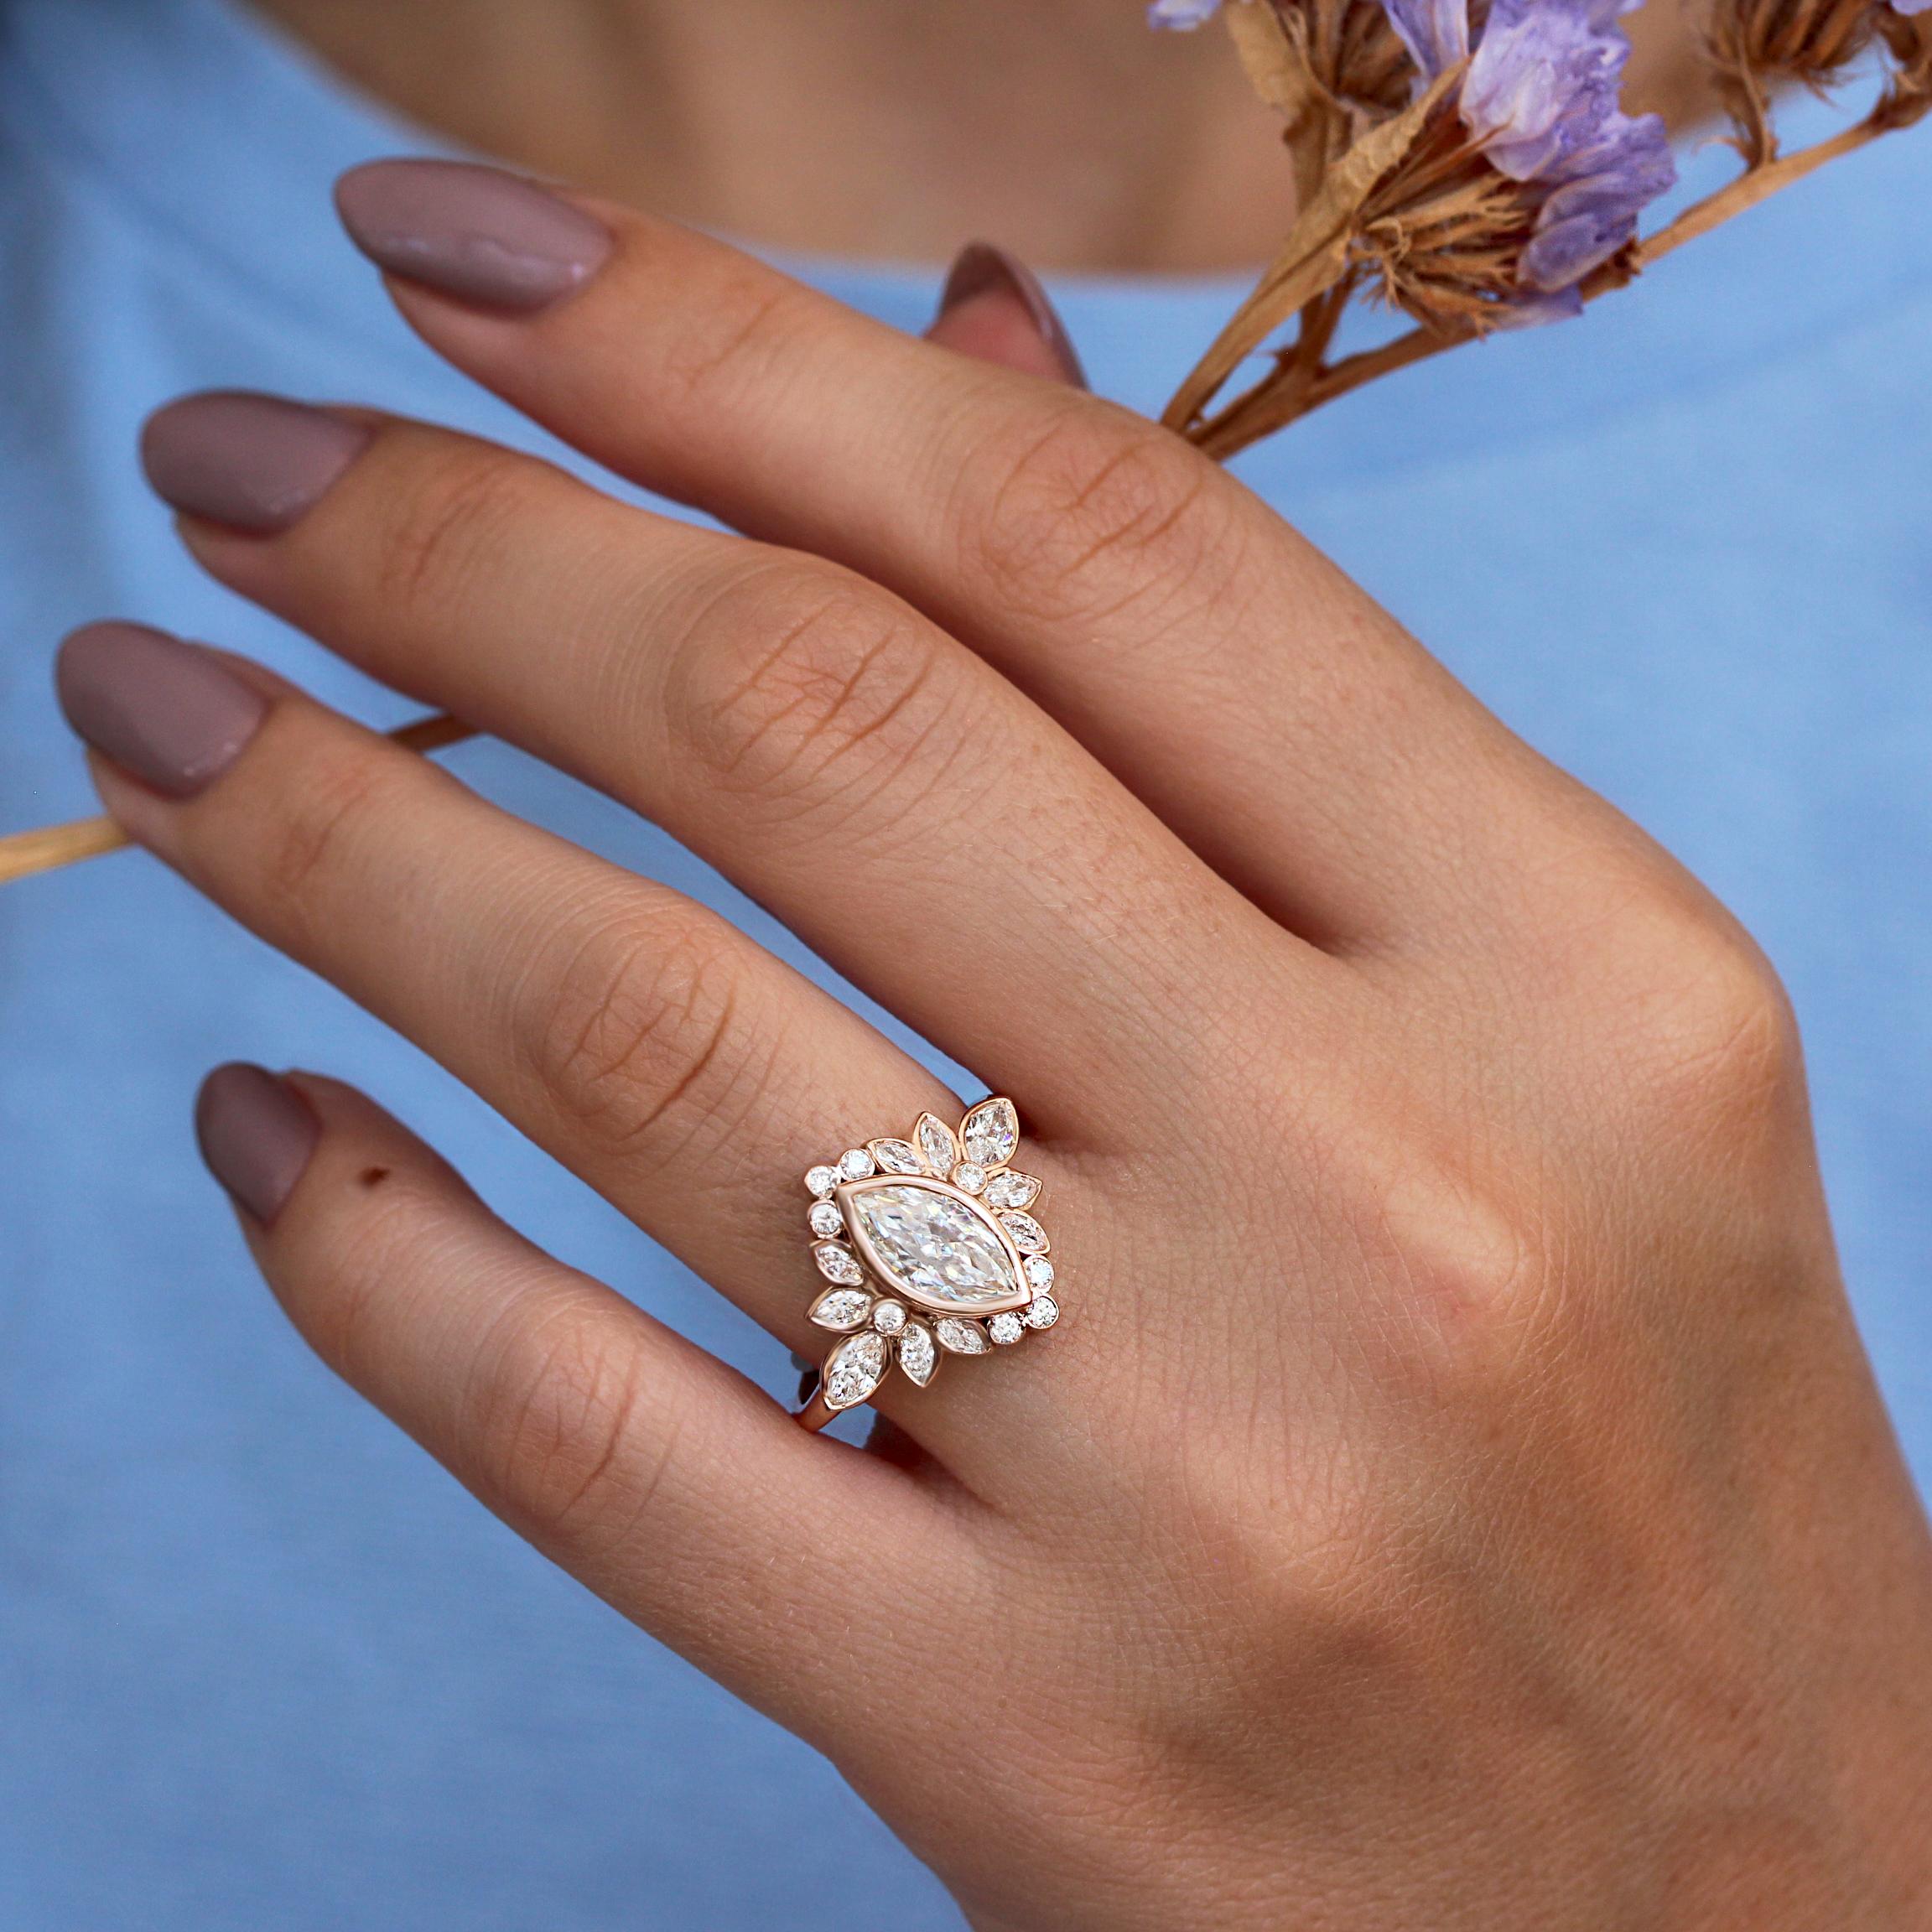 Beautiful Marquise Moissanite Floral cluster Engagement Ring, all diamonds are bezel set. Designed by Silly Shiny Diamonds.
 A Luxurious and unique design, handmade with ethical and environmentally friendly stones. 
The perfect ring that doesn't